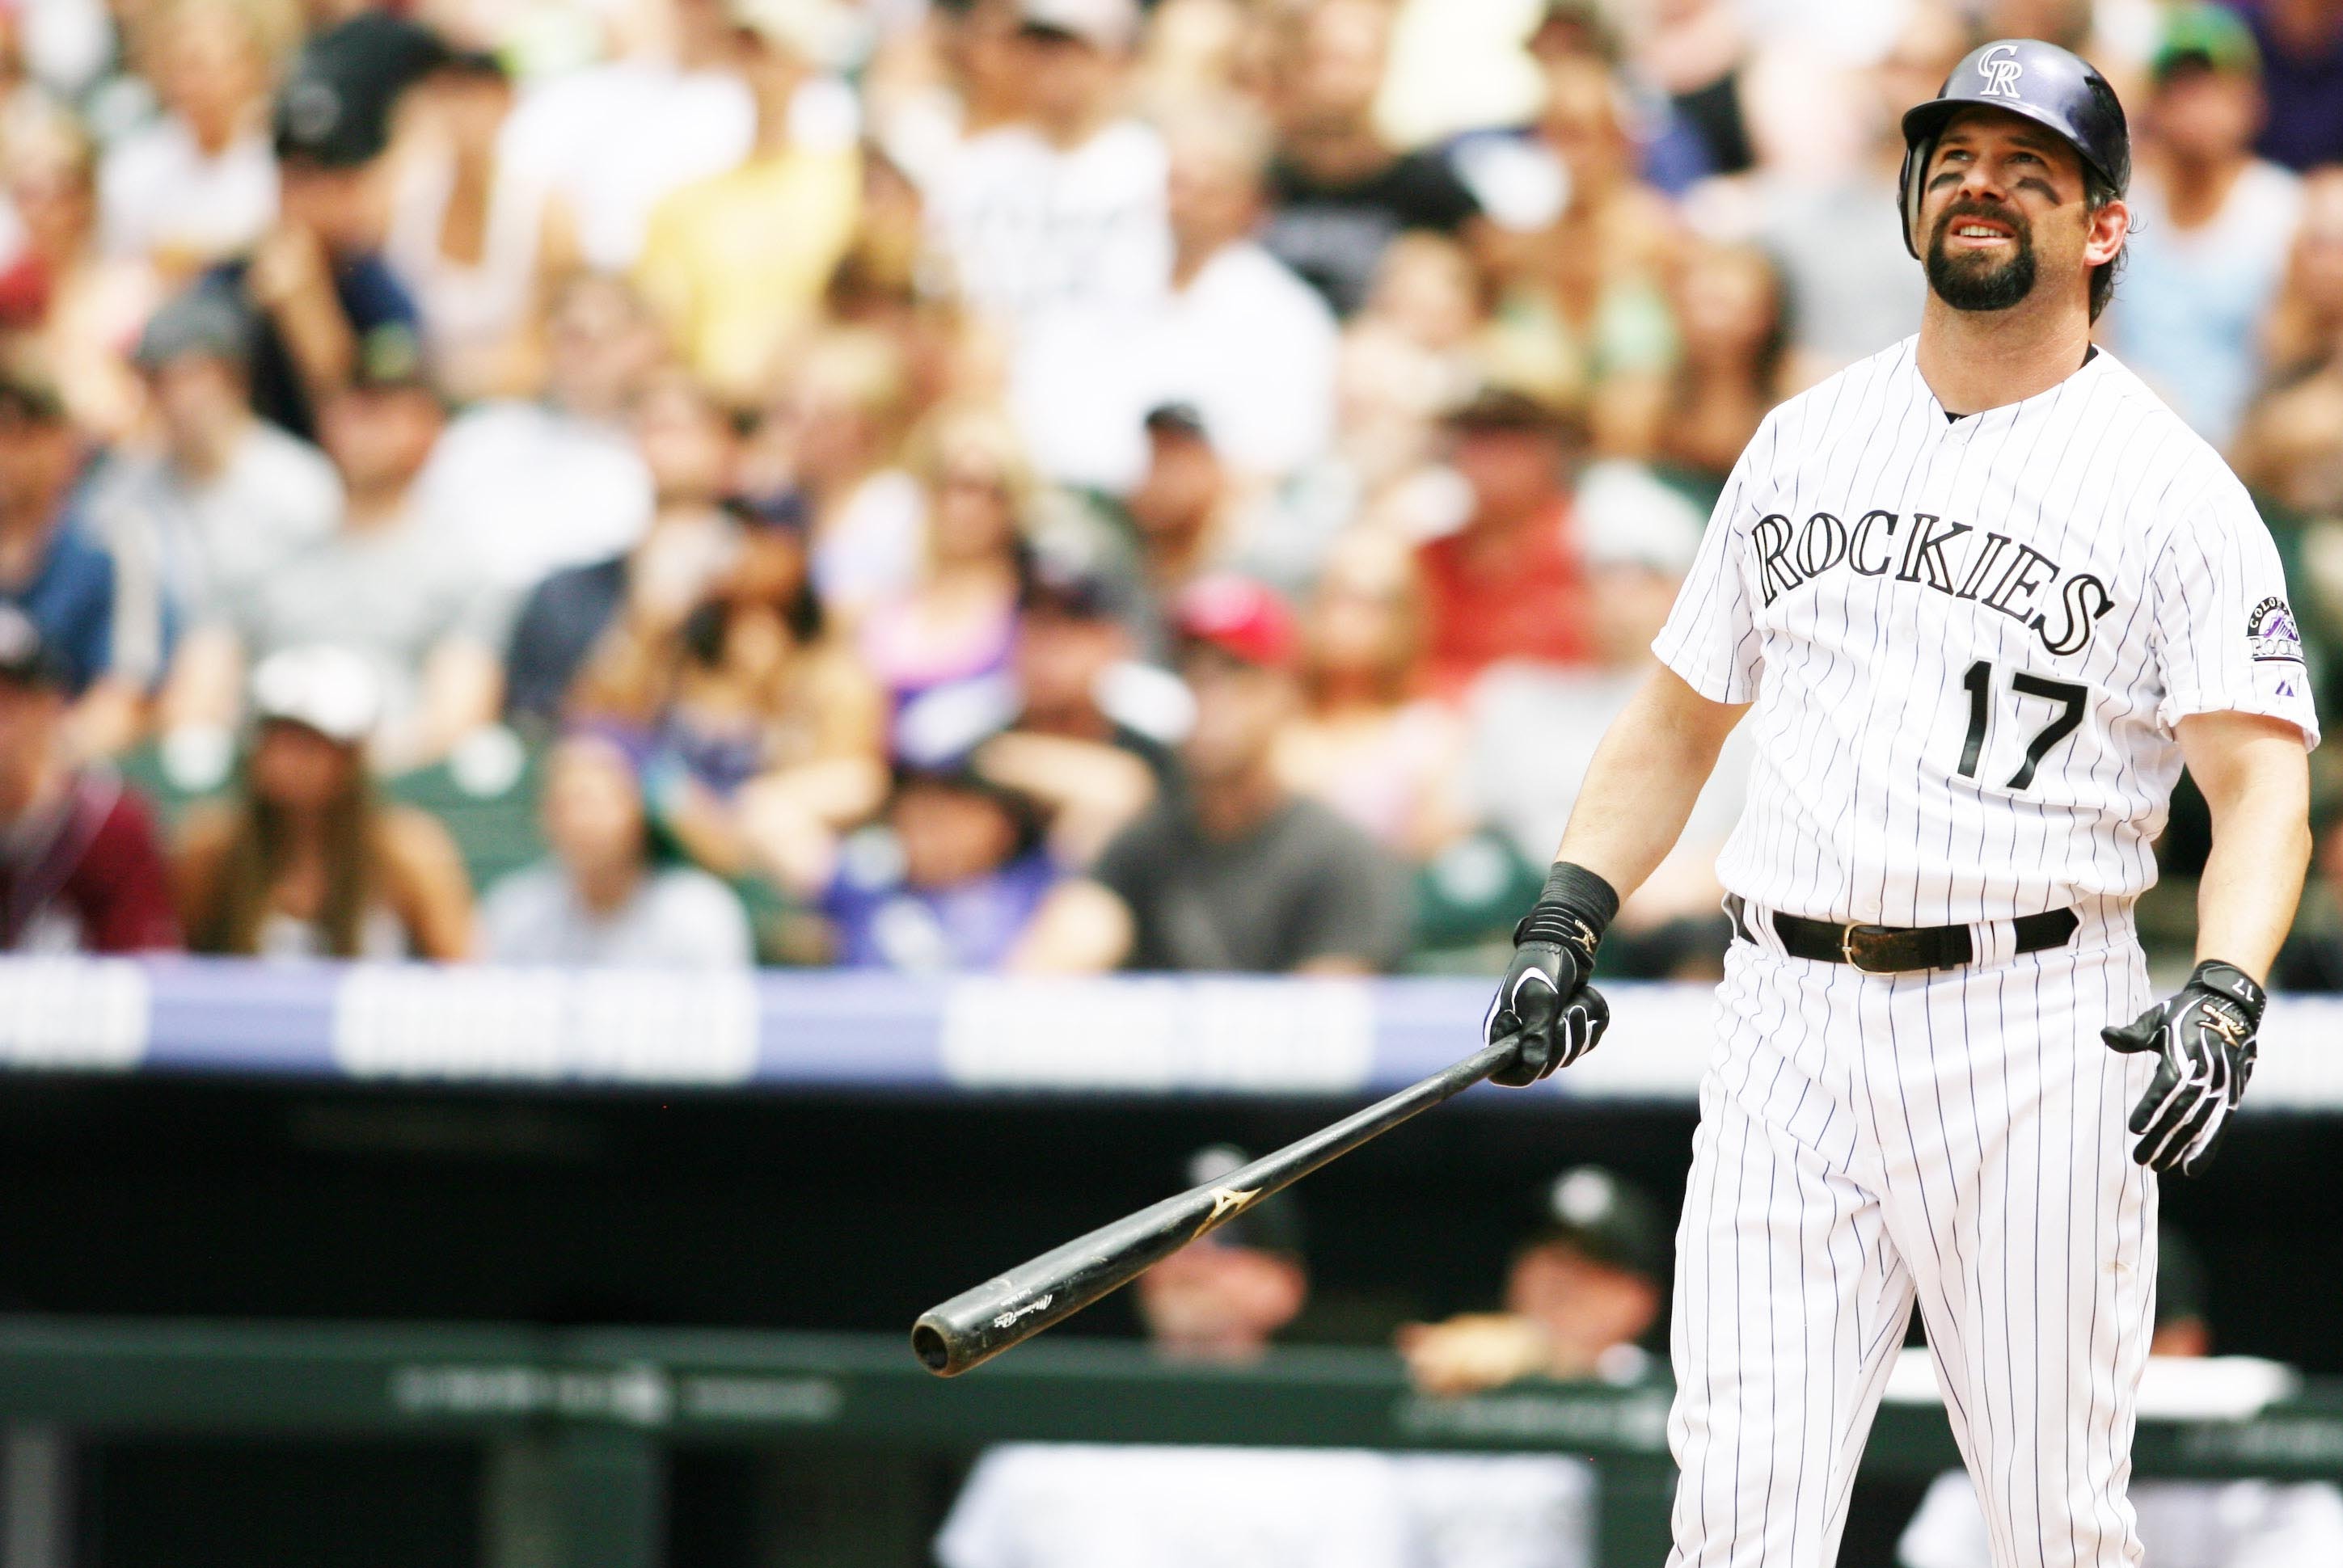 When Colorado Rockies star Todd Helton admitted that his play was